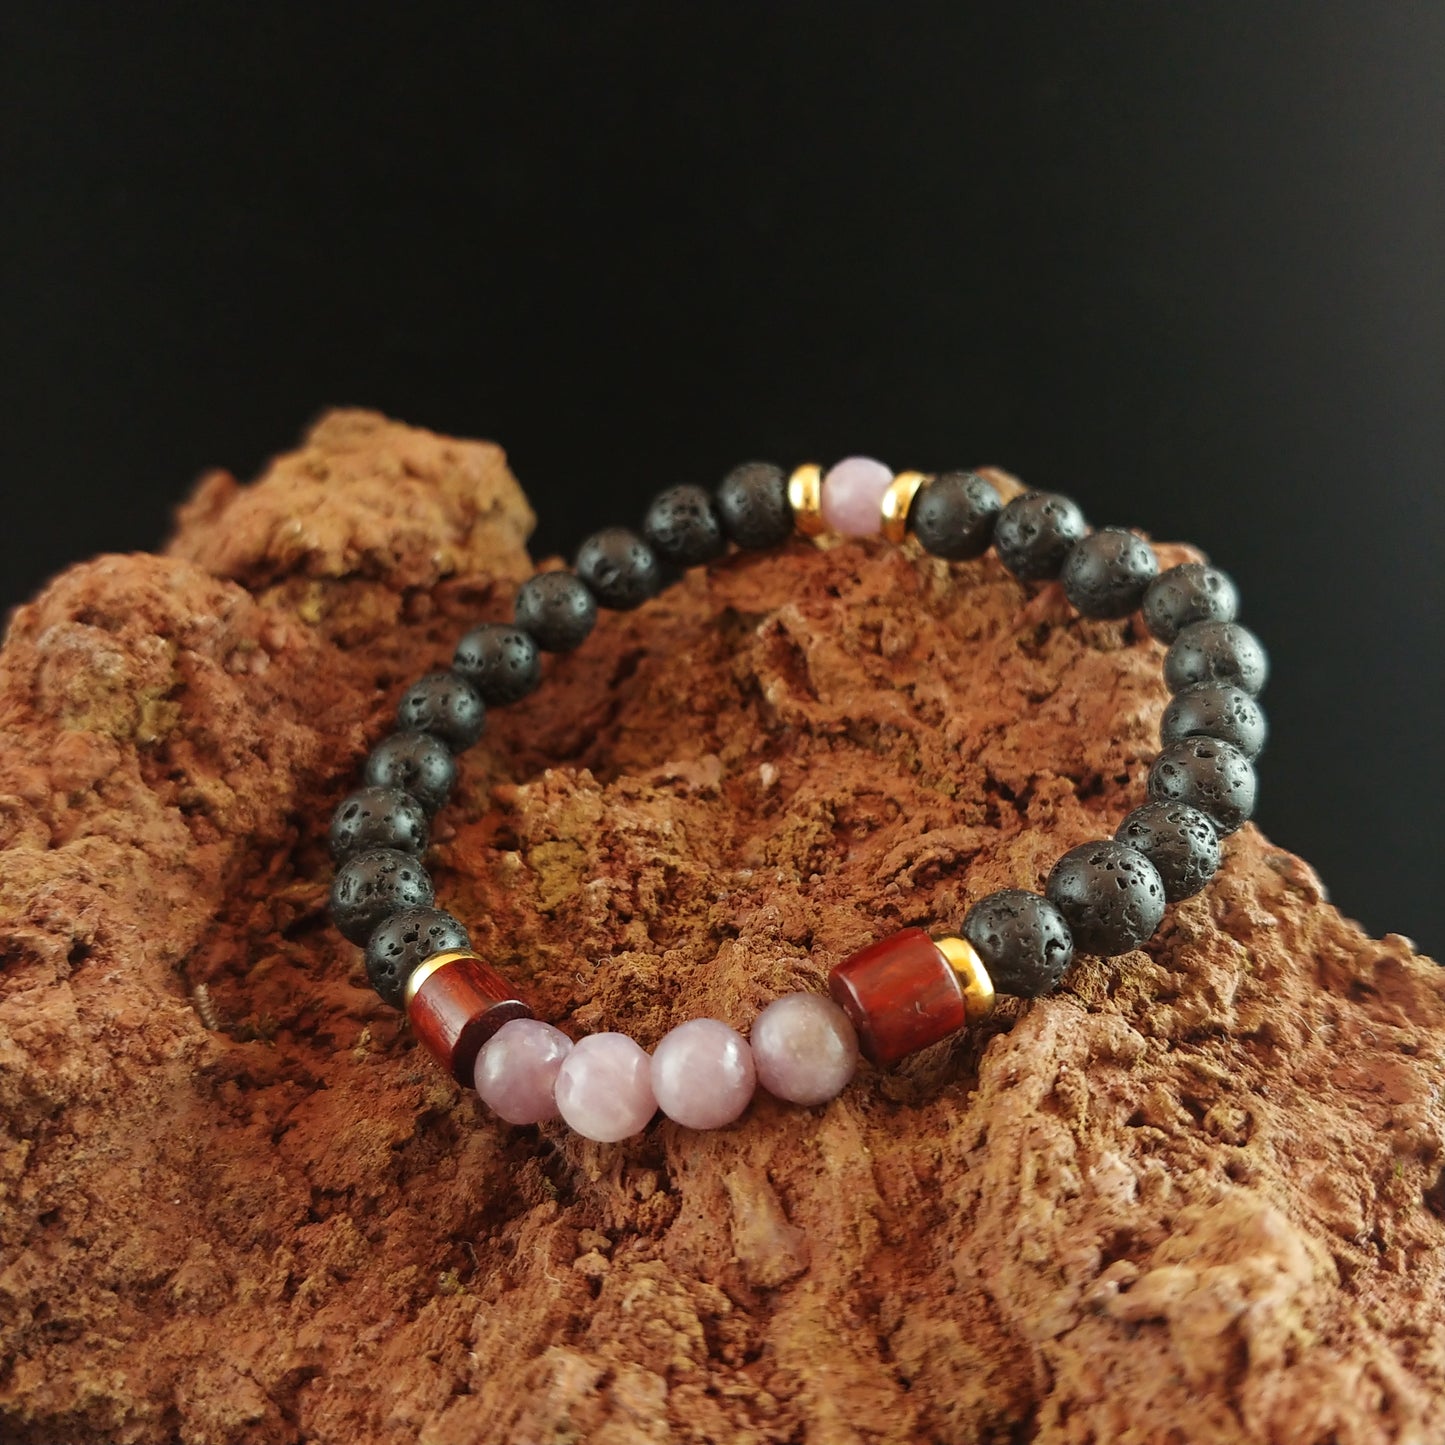 Bracelet sitting on a red lava stone. Bracelet is made of lava beads and a few bright pink Rose quartz, it also has thin golden colored spacers and larger wooden spacers between the lava and rose quartz.